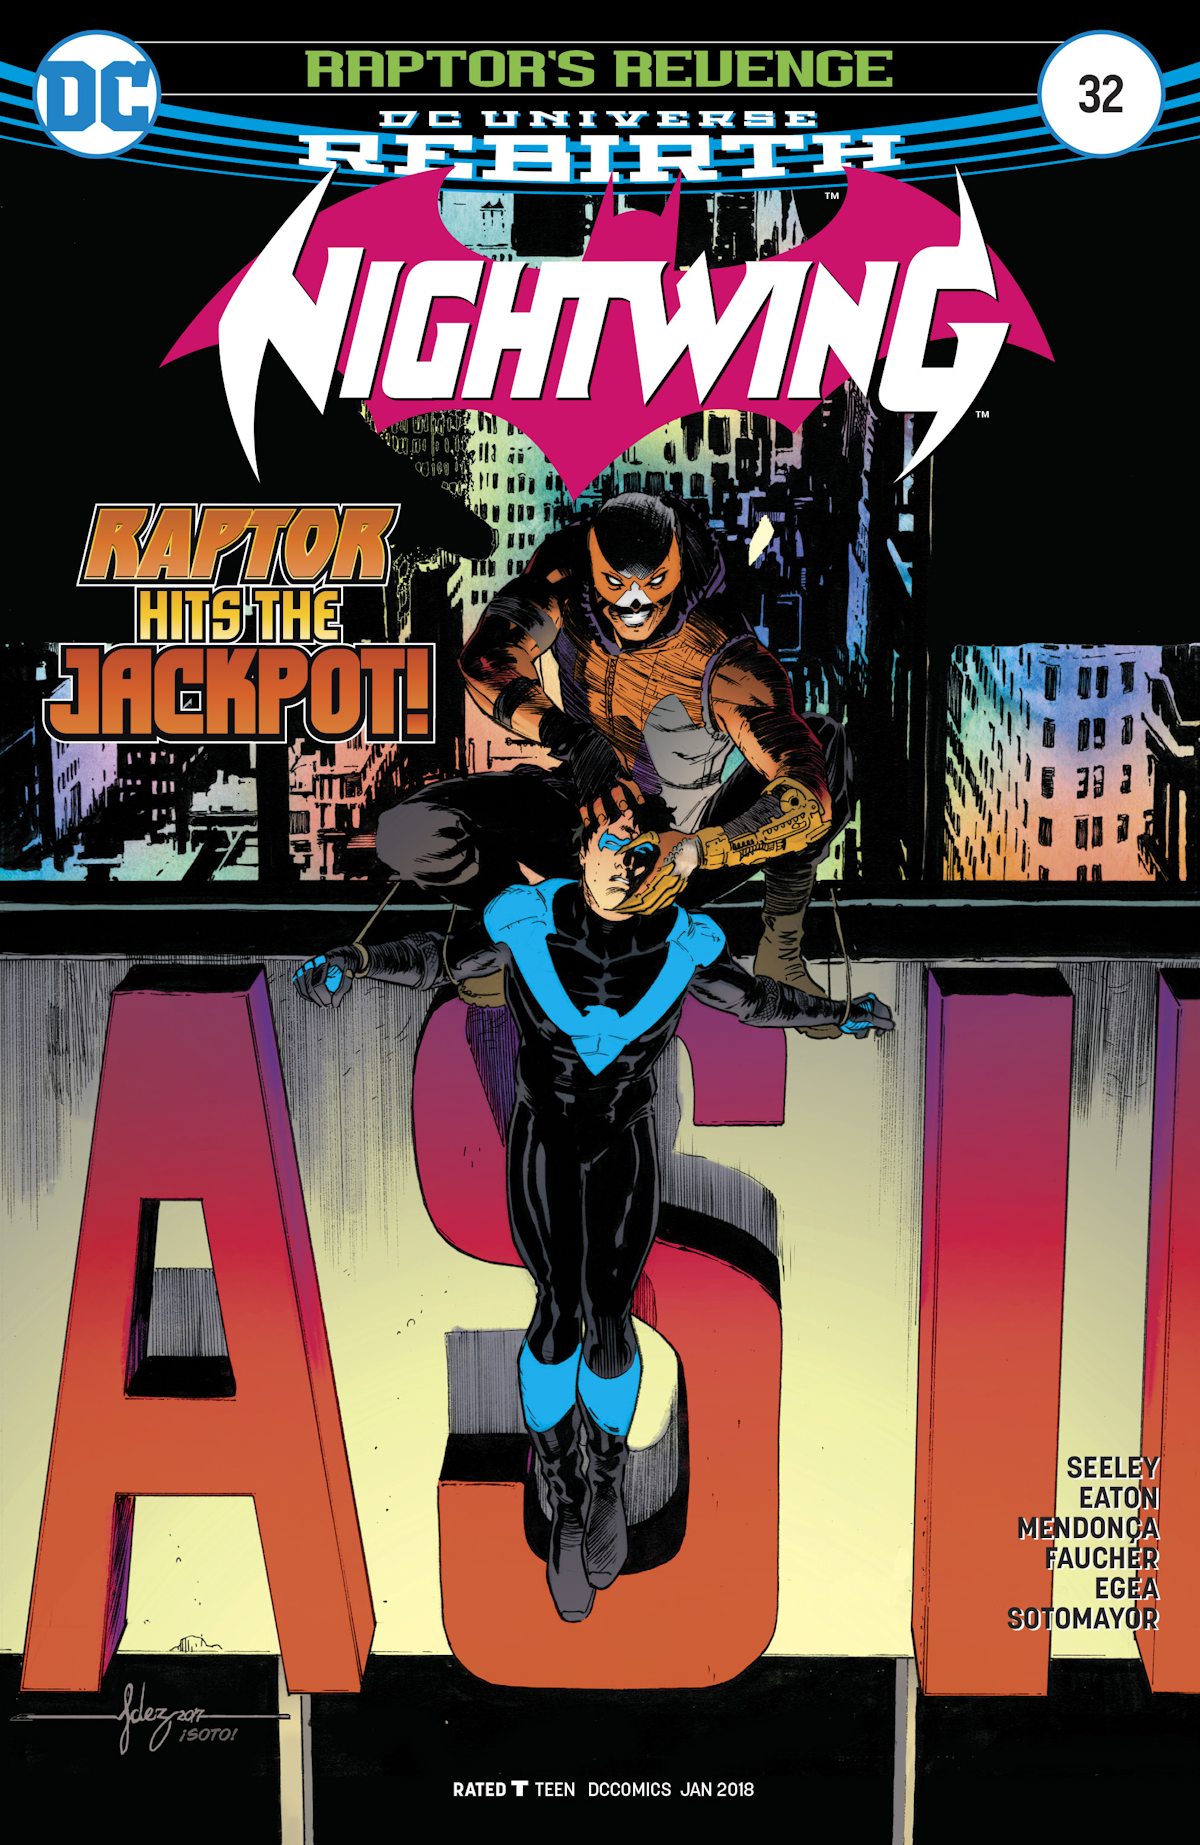 Nightwing Vol. 4 32 (Cover A)